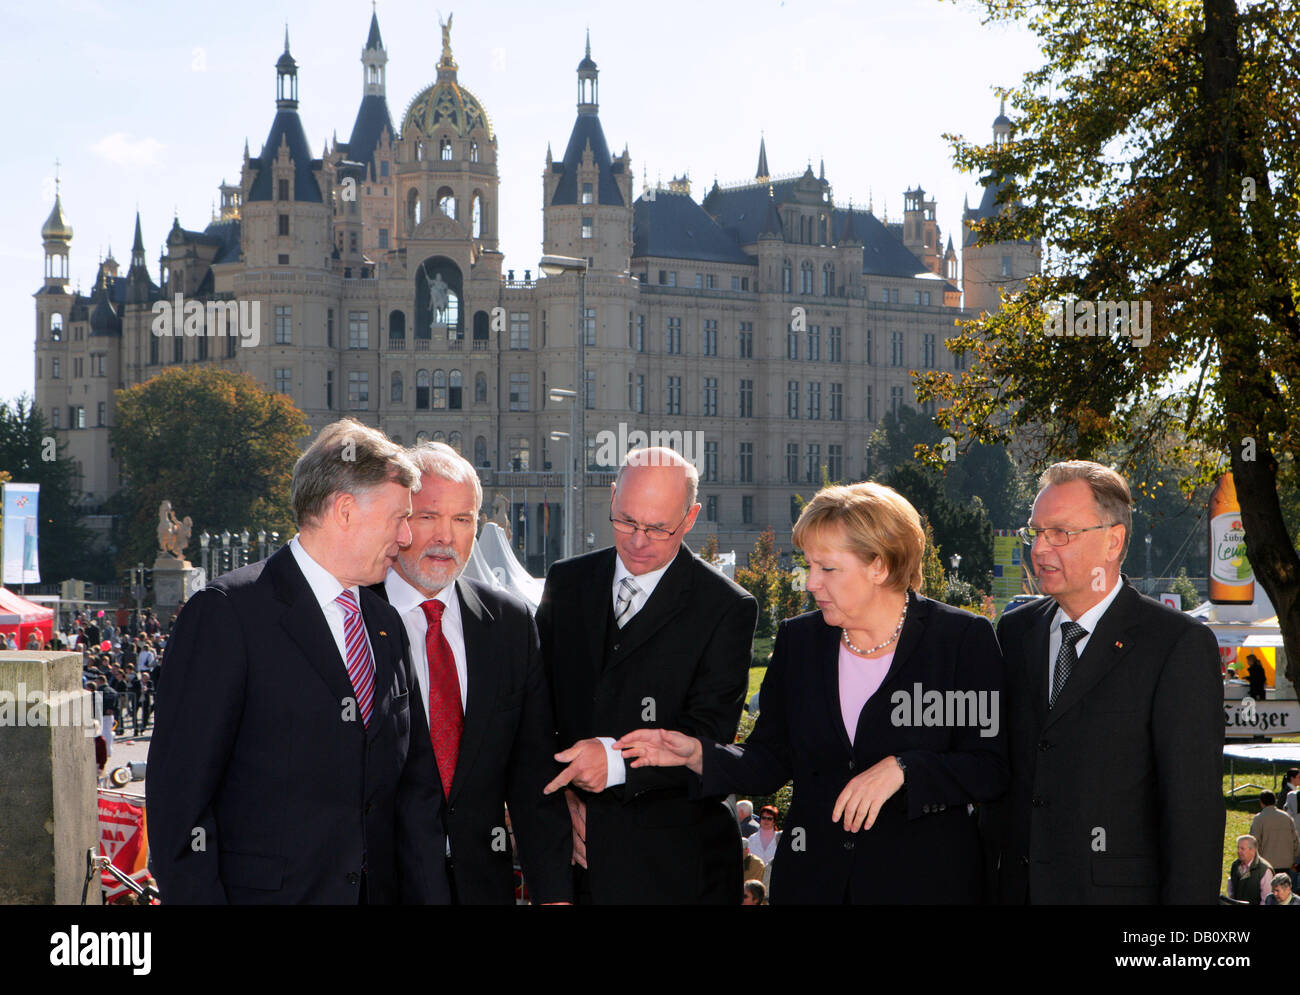 (L-R) The President of the German Bundesrat Harald Ringstorff, the President of the German Bundestag Norbert Lammert, the German President Horst Koehler, German Chancellor Angela Merkel and the President of the Federal Constitutional Court Hans-Juergen Papier pose for a group photo at the Palace in Schwerin, Germany, 03 October 2007. The representatives of the five constitutional b Stock Photo